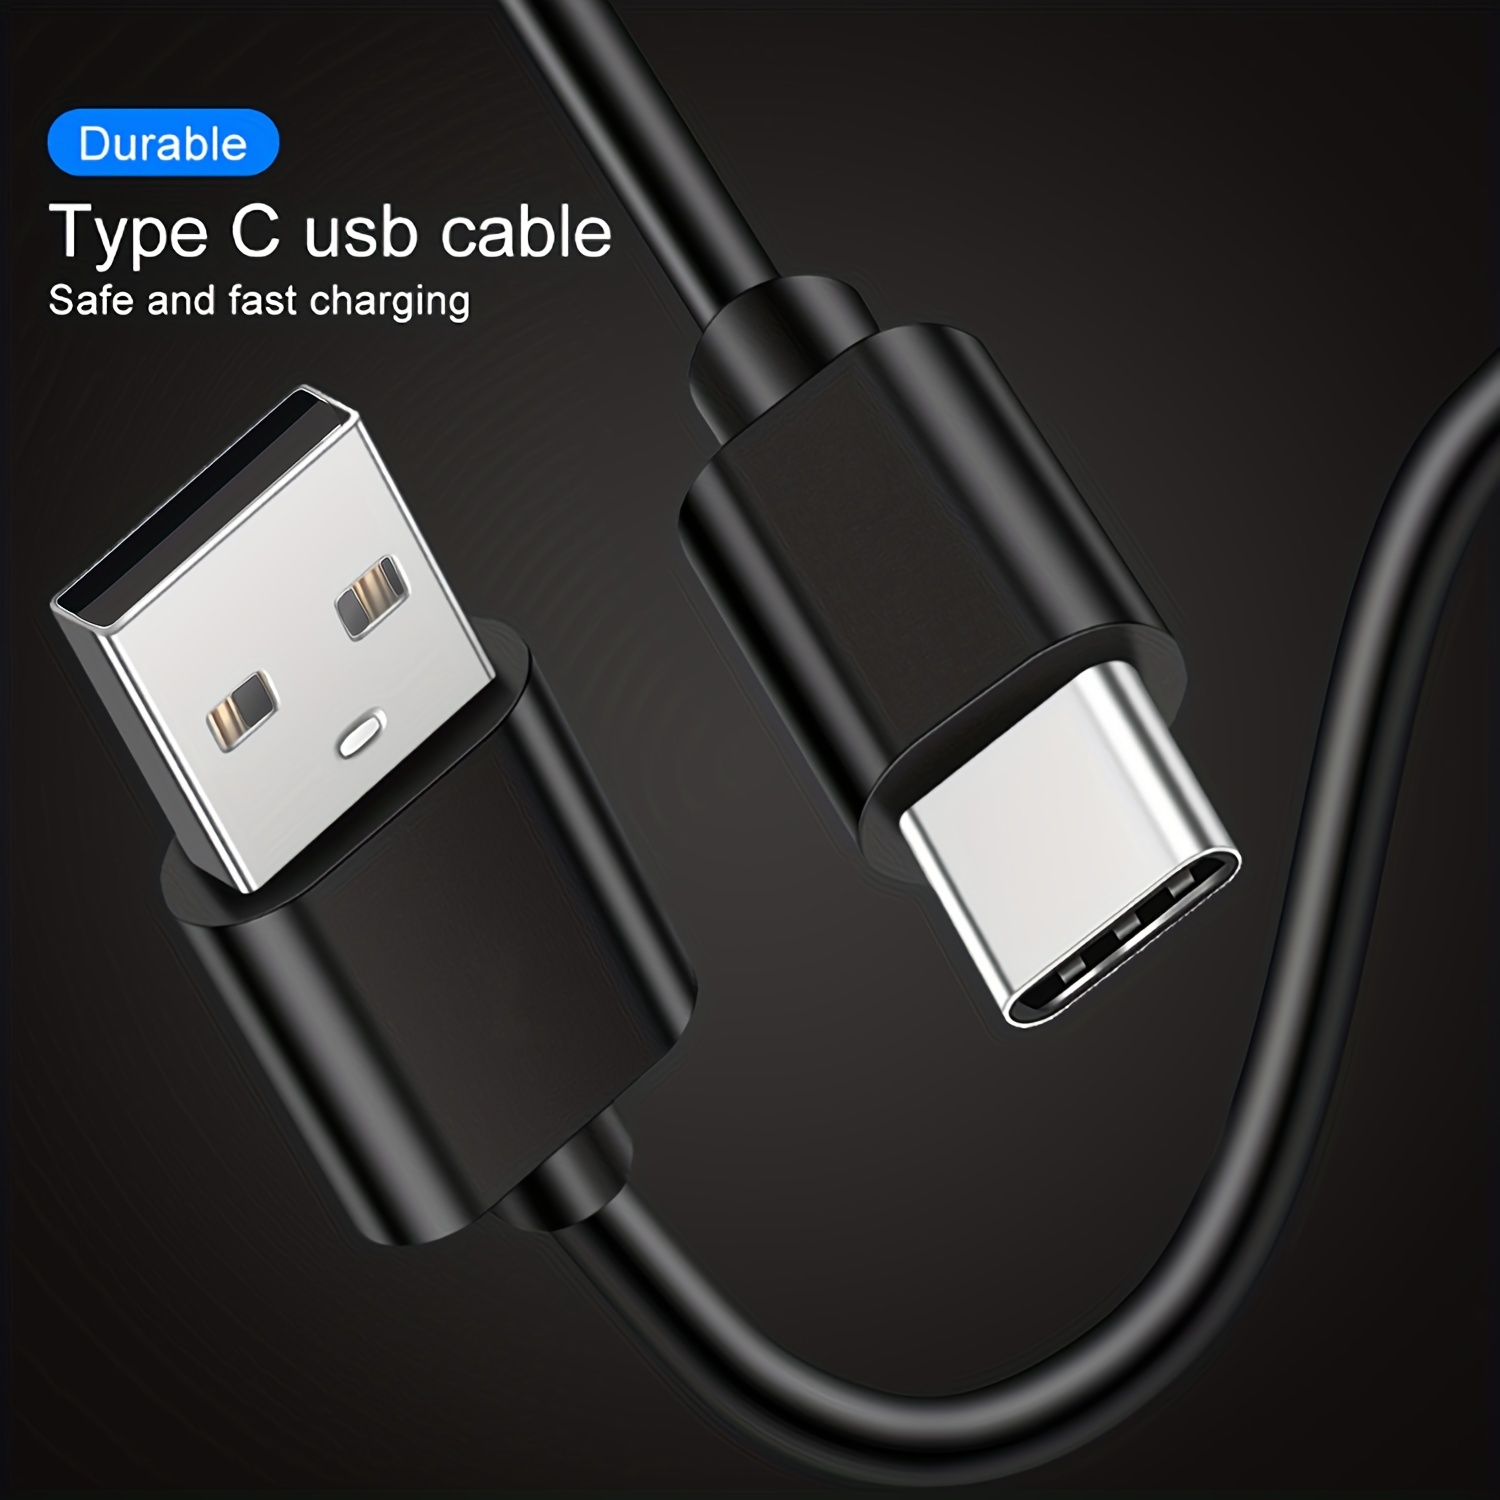 Type-C USB Data/Charger Cable for Sony WH-XB700, WH-XB900N Bluetooth Wireless Headphones - image 4 of 4